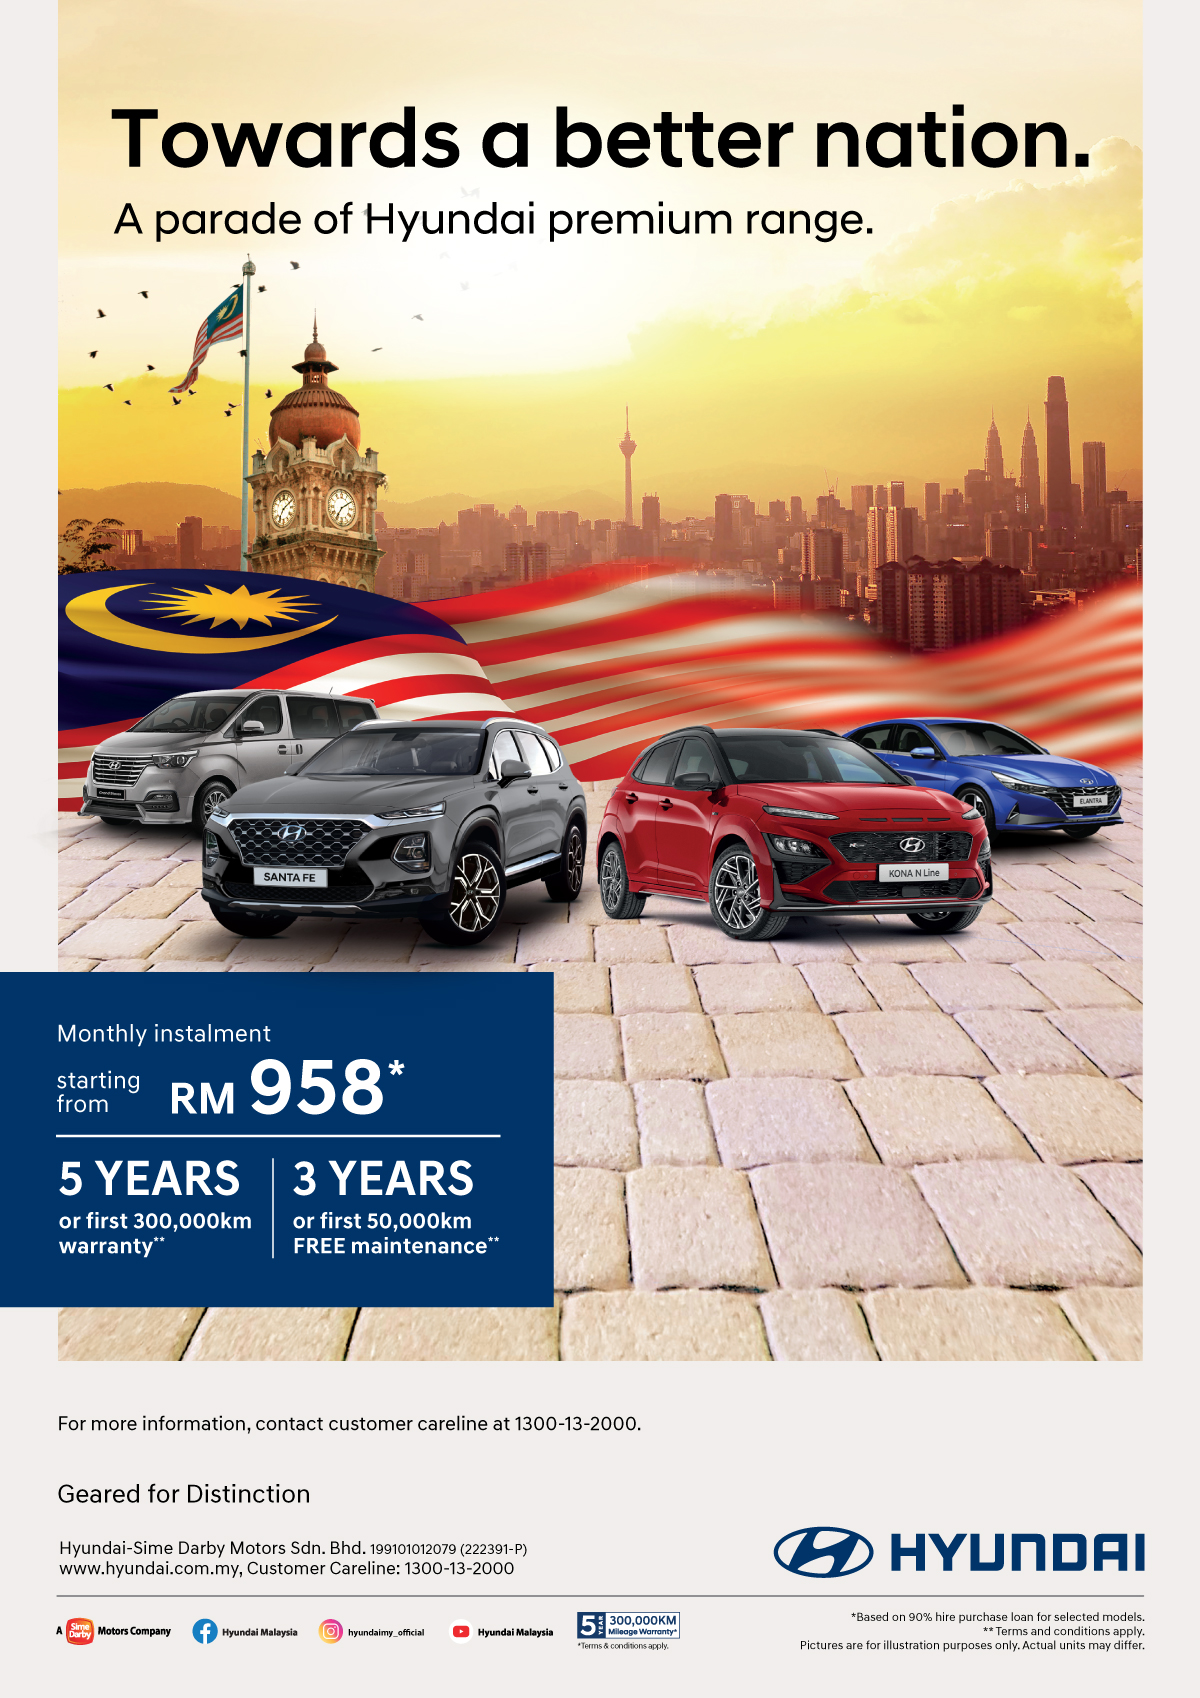 Towards a better nation. A parade of Hyundai premium range. Monthly instalment starting from RM 958* | 5 Years or first 300000km warranty** | 3 Years or first 50000km FREE maintenance**. For more information, contact customer careline at 1300-13-2000. Terms and Conditions apply.